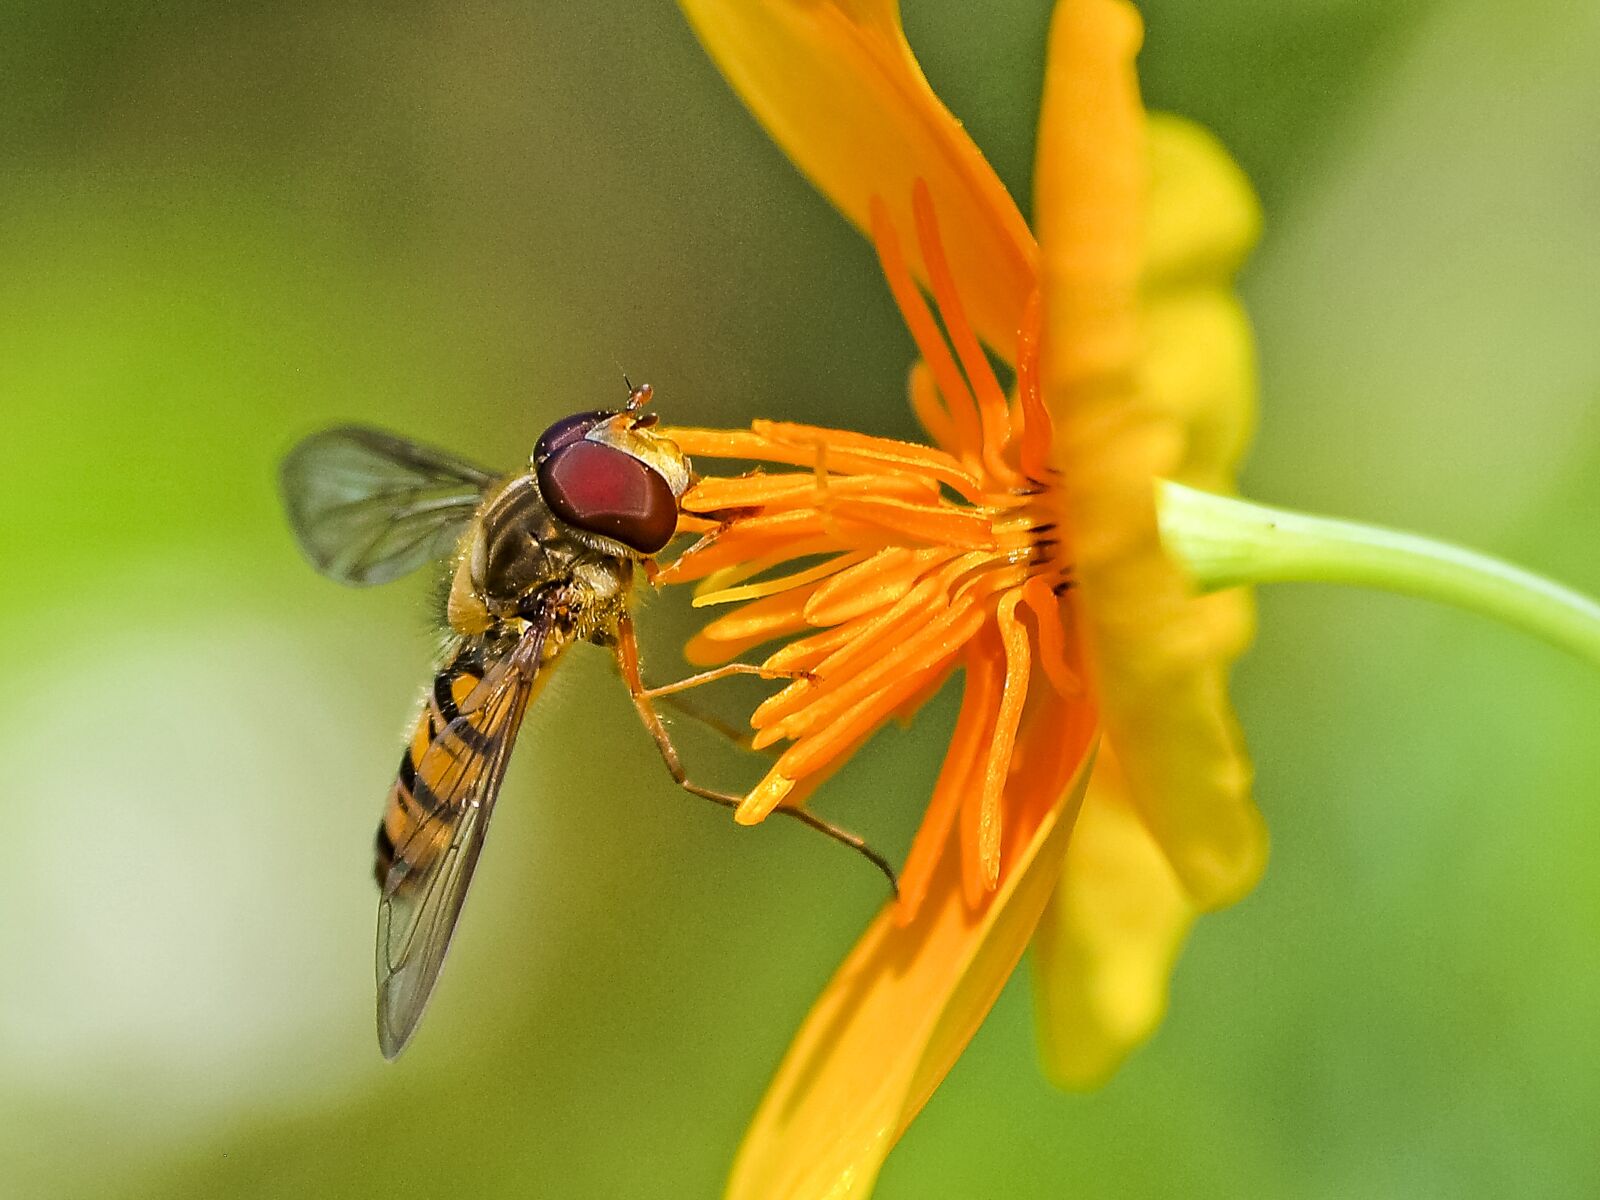 Olympus Zuiko Digital ED 70-300mm F4.0-5.6 sample photo. Hoverfly, insect, blossom photography